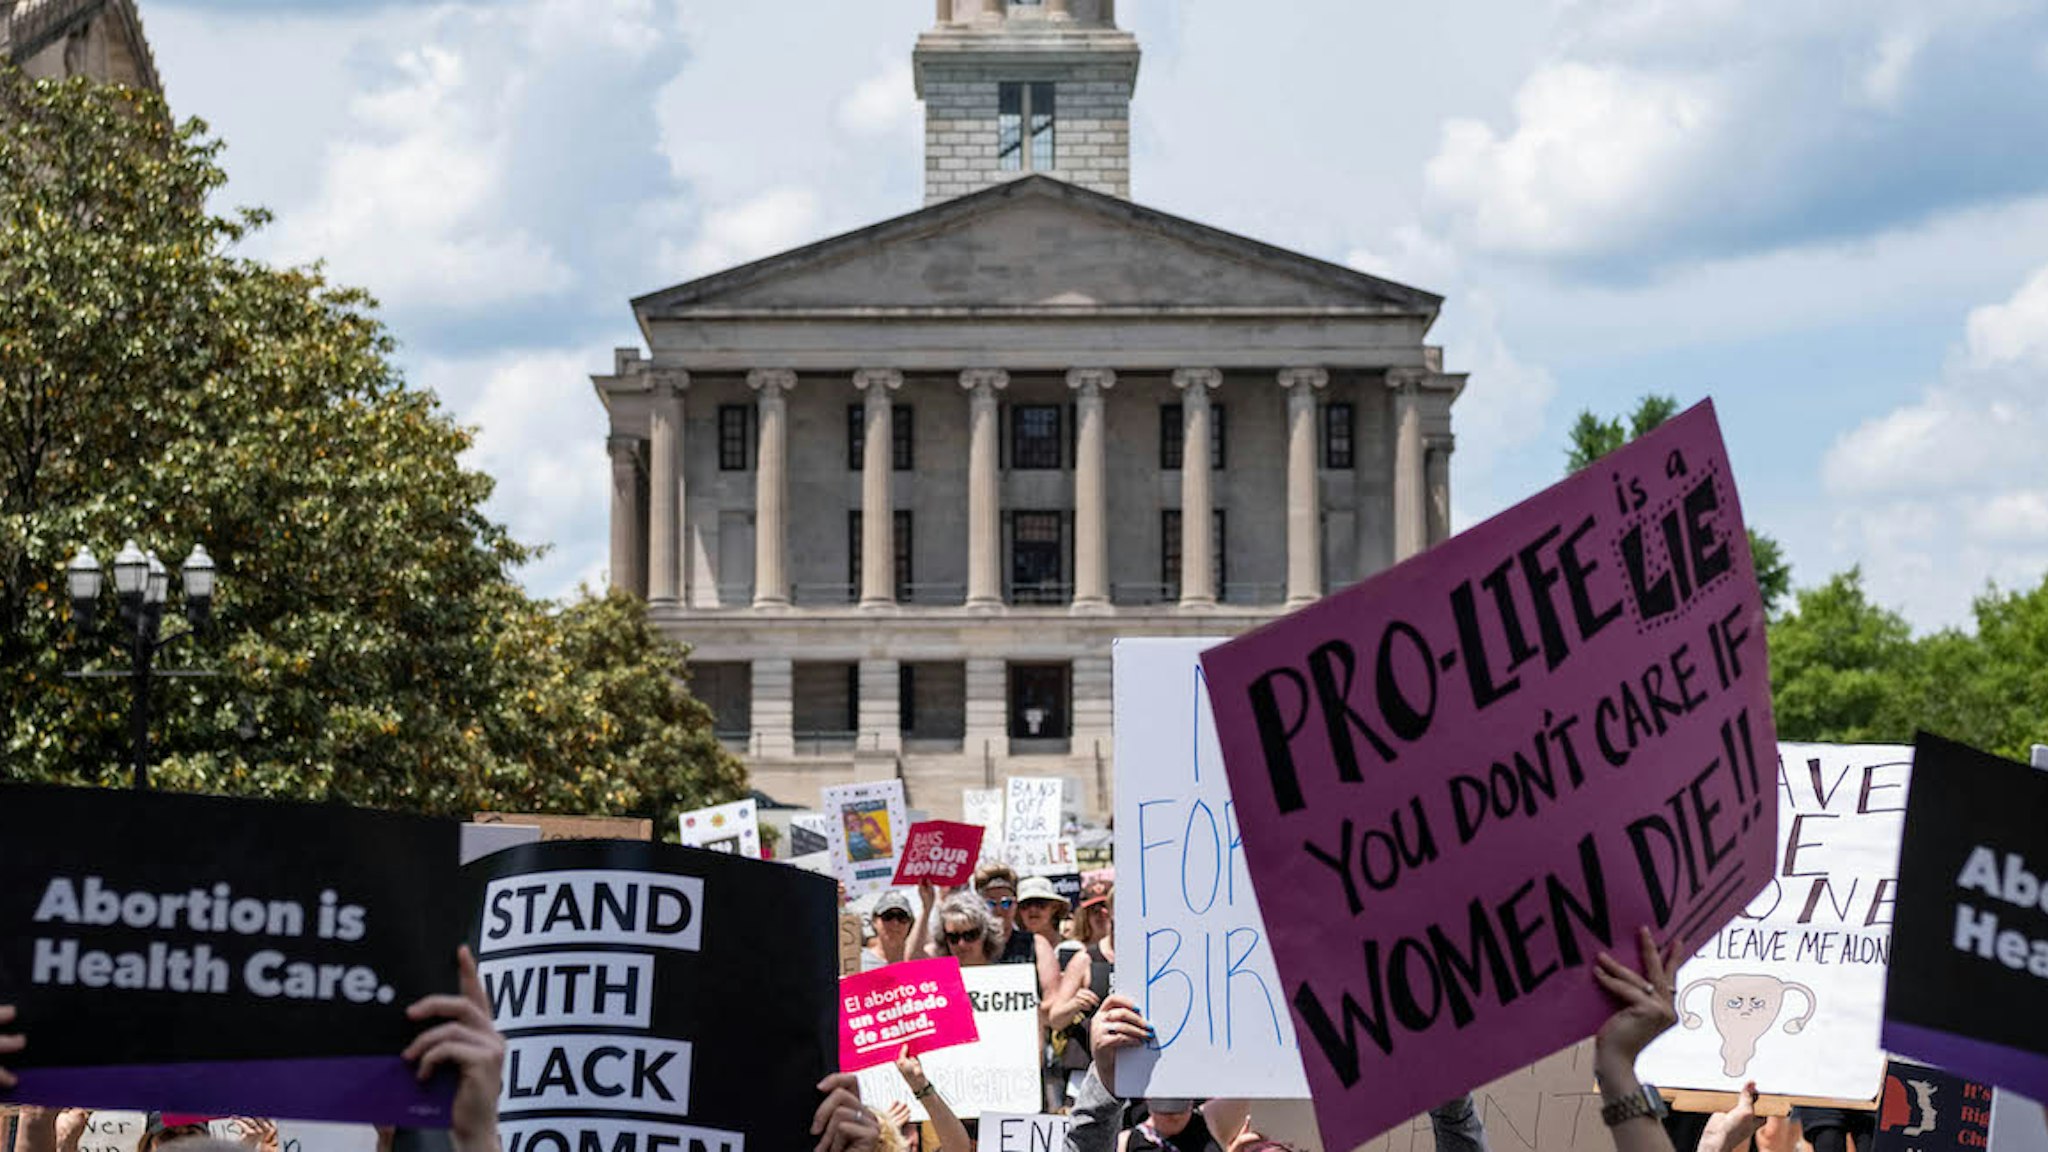 Activists gather near the Tennessee State Capital building in Nashville, Tennessee, May 14,2022. (Photo by SETH HERALD / AFP) (Photo by SETH HERALD/AFP via Getty Images)